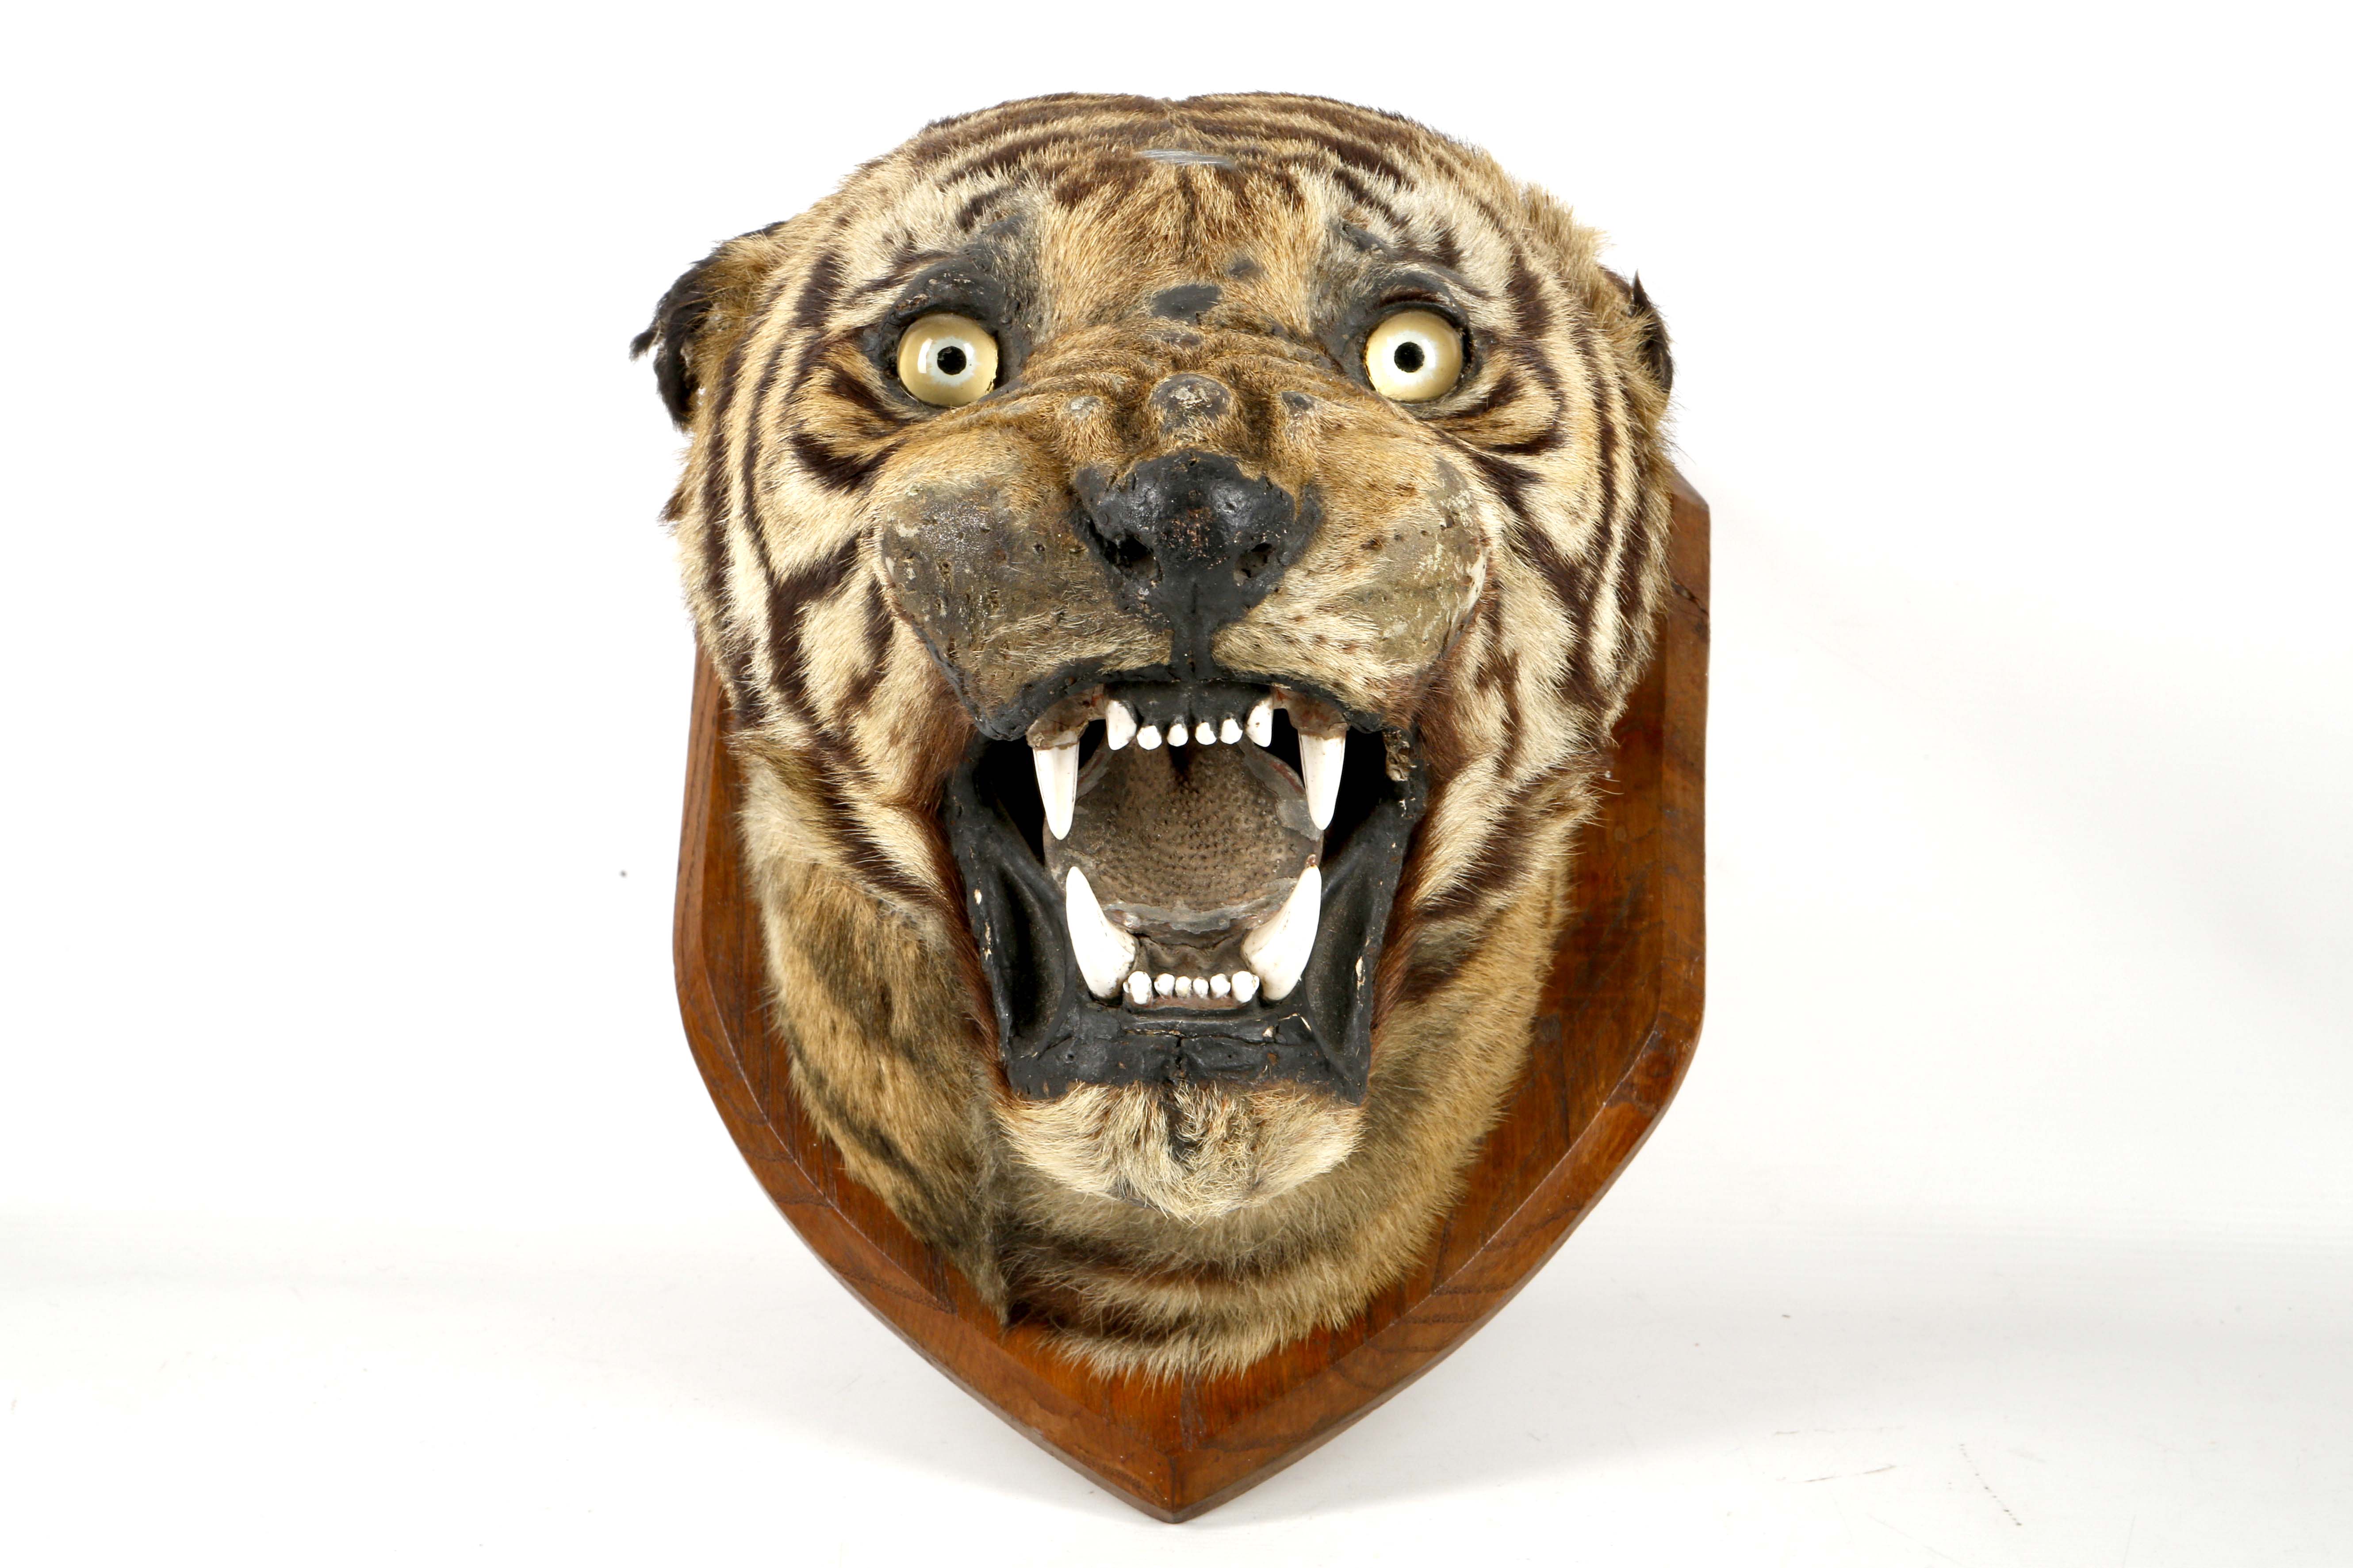 An antique taxidermed tiger's head trophy, mounted on an oak shield with plaque